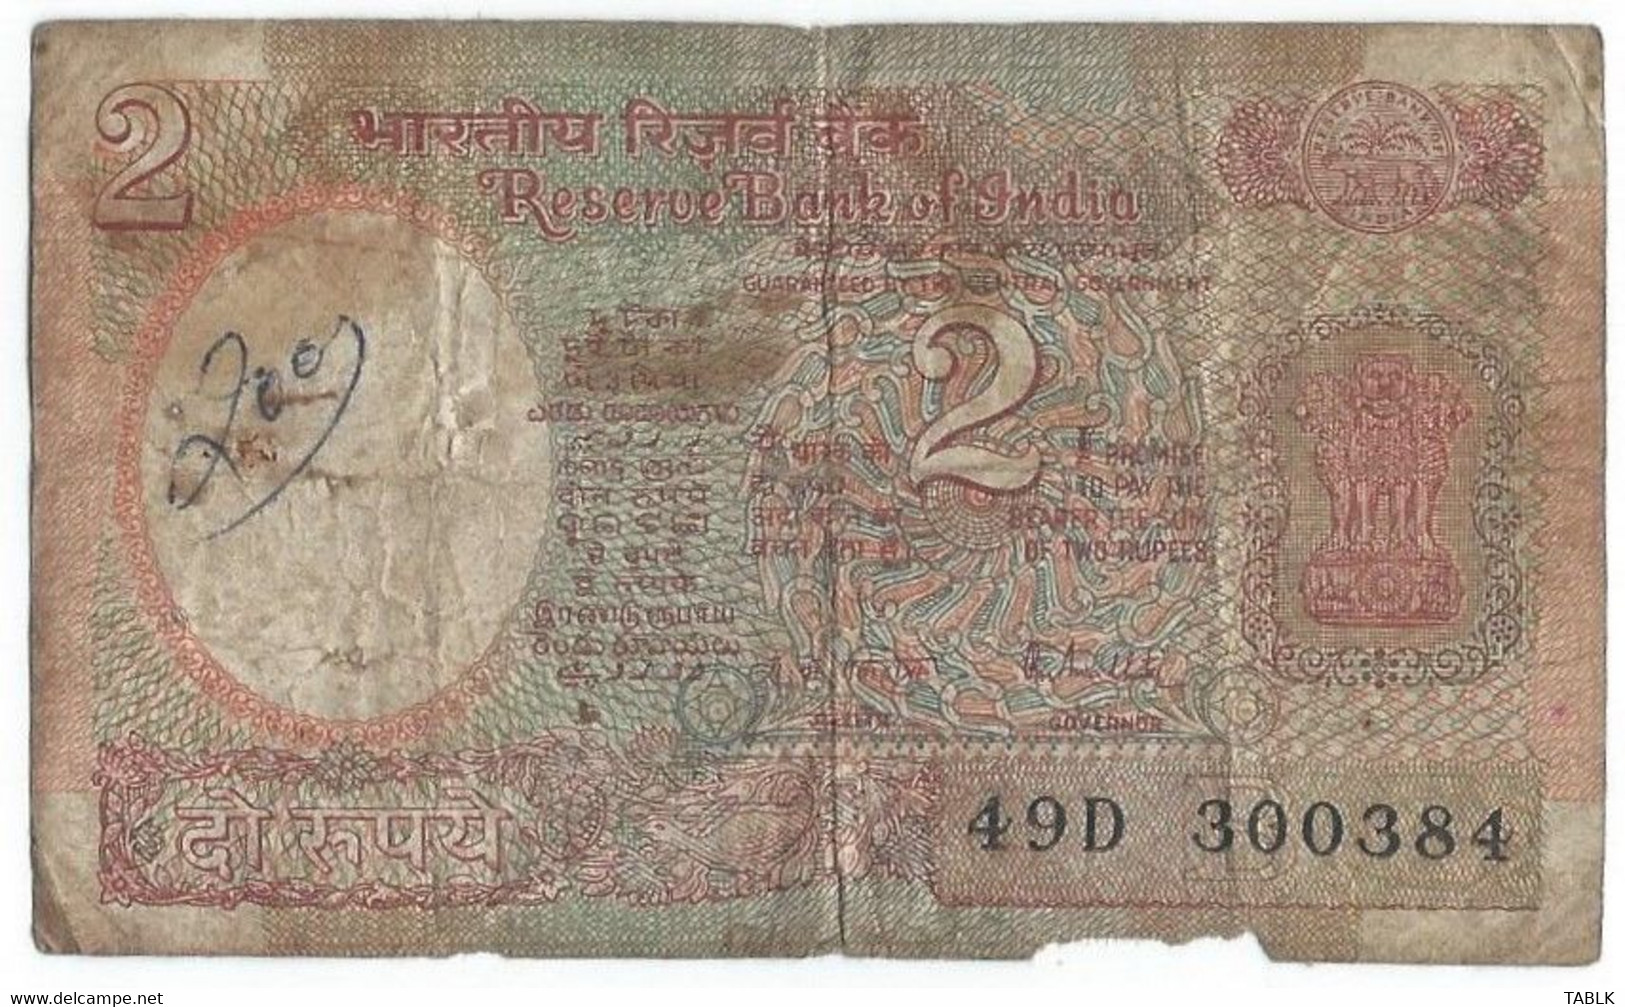 MM701 - INDIA - 2 RUPEES - Inde